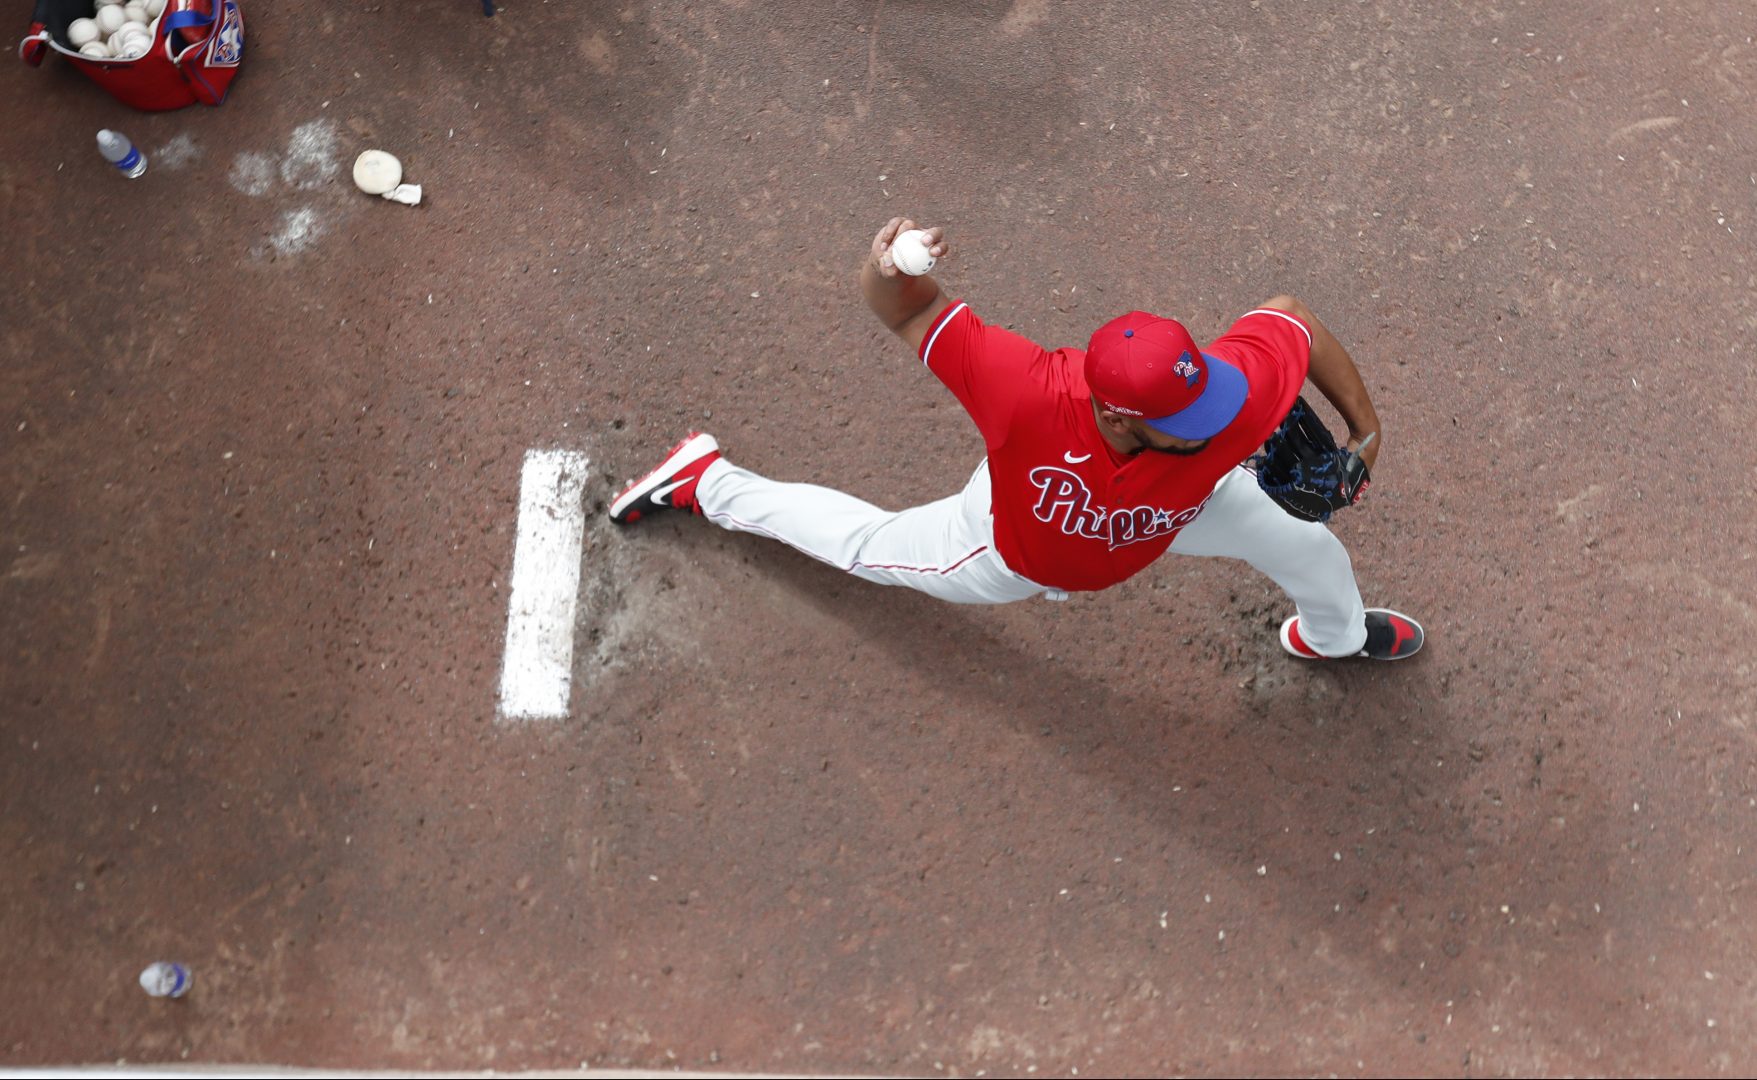 Philadelphia Phillies relief pitcher Deolis Guerra throws in the bullpen during a spring training baseball game, Sunday, March 8, 2020, in Dunedin, Fla. 